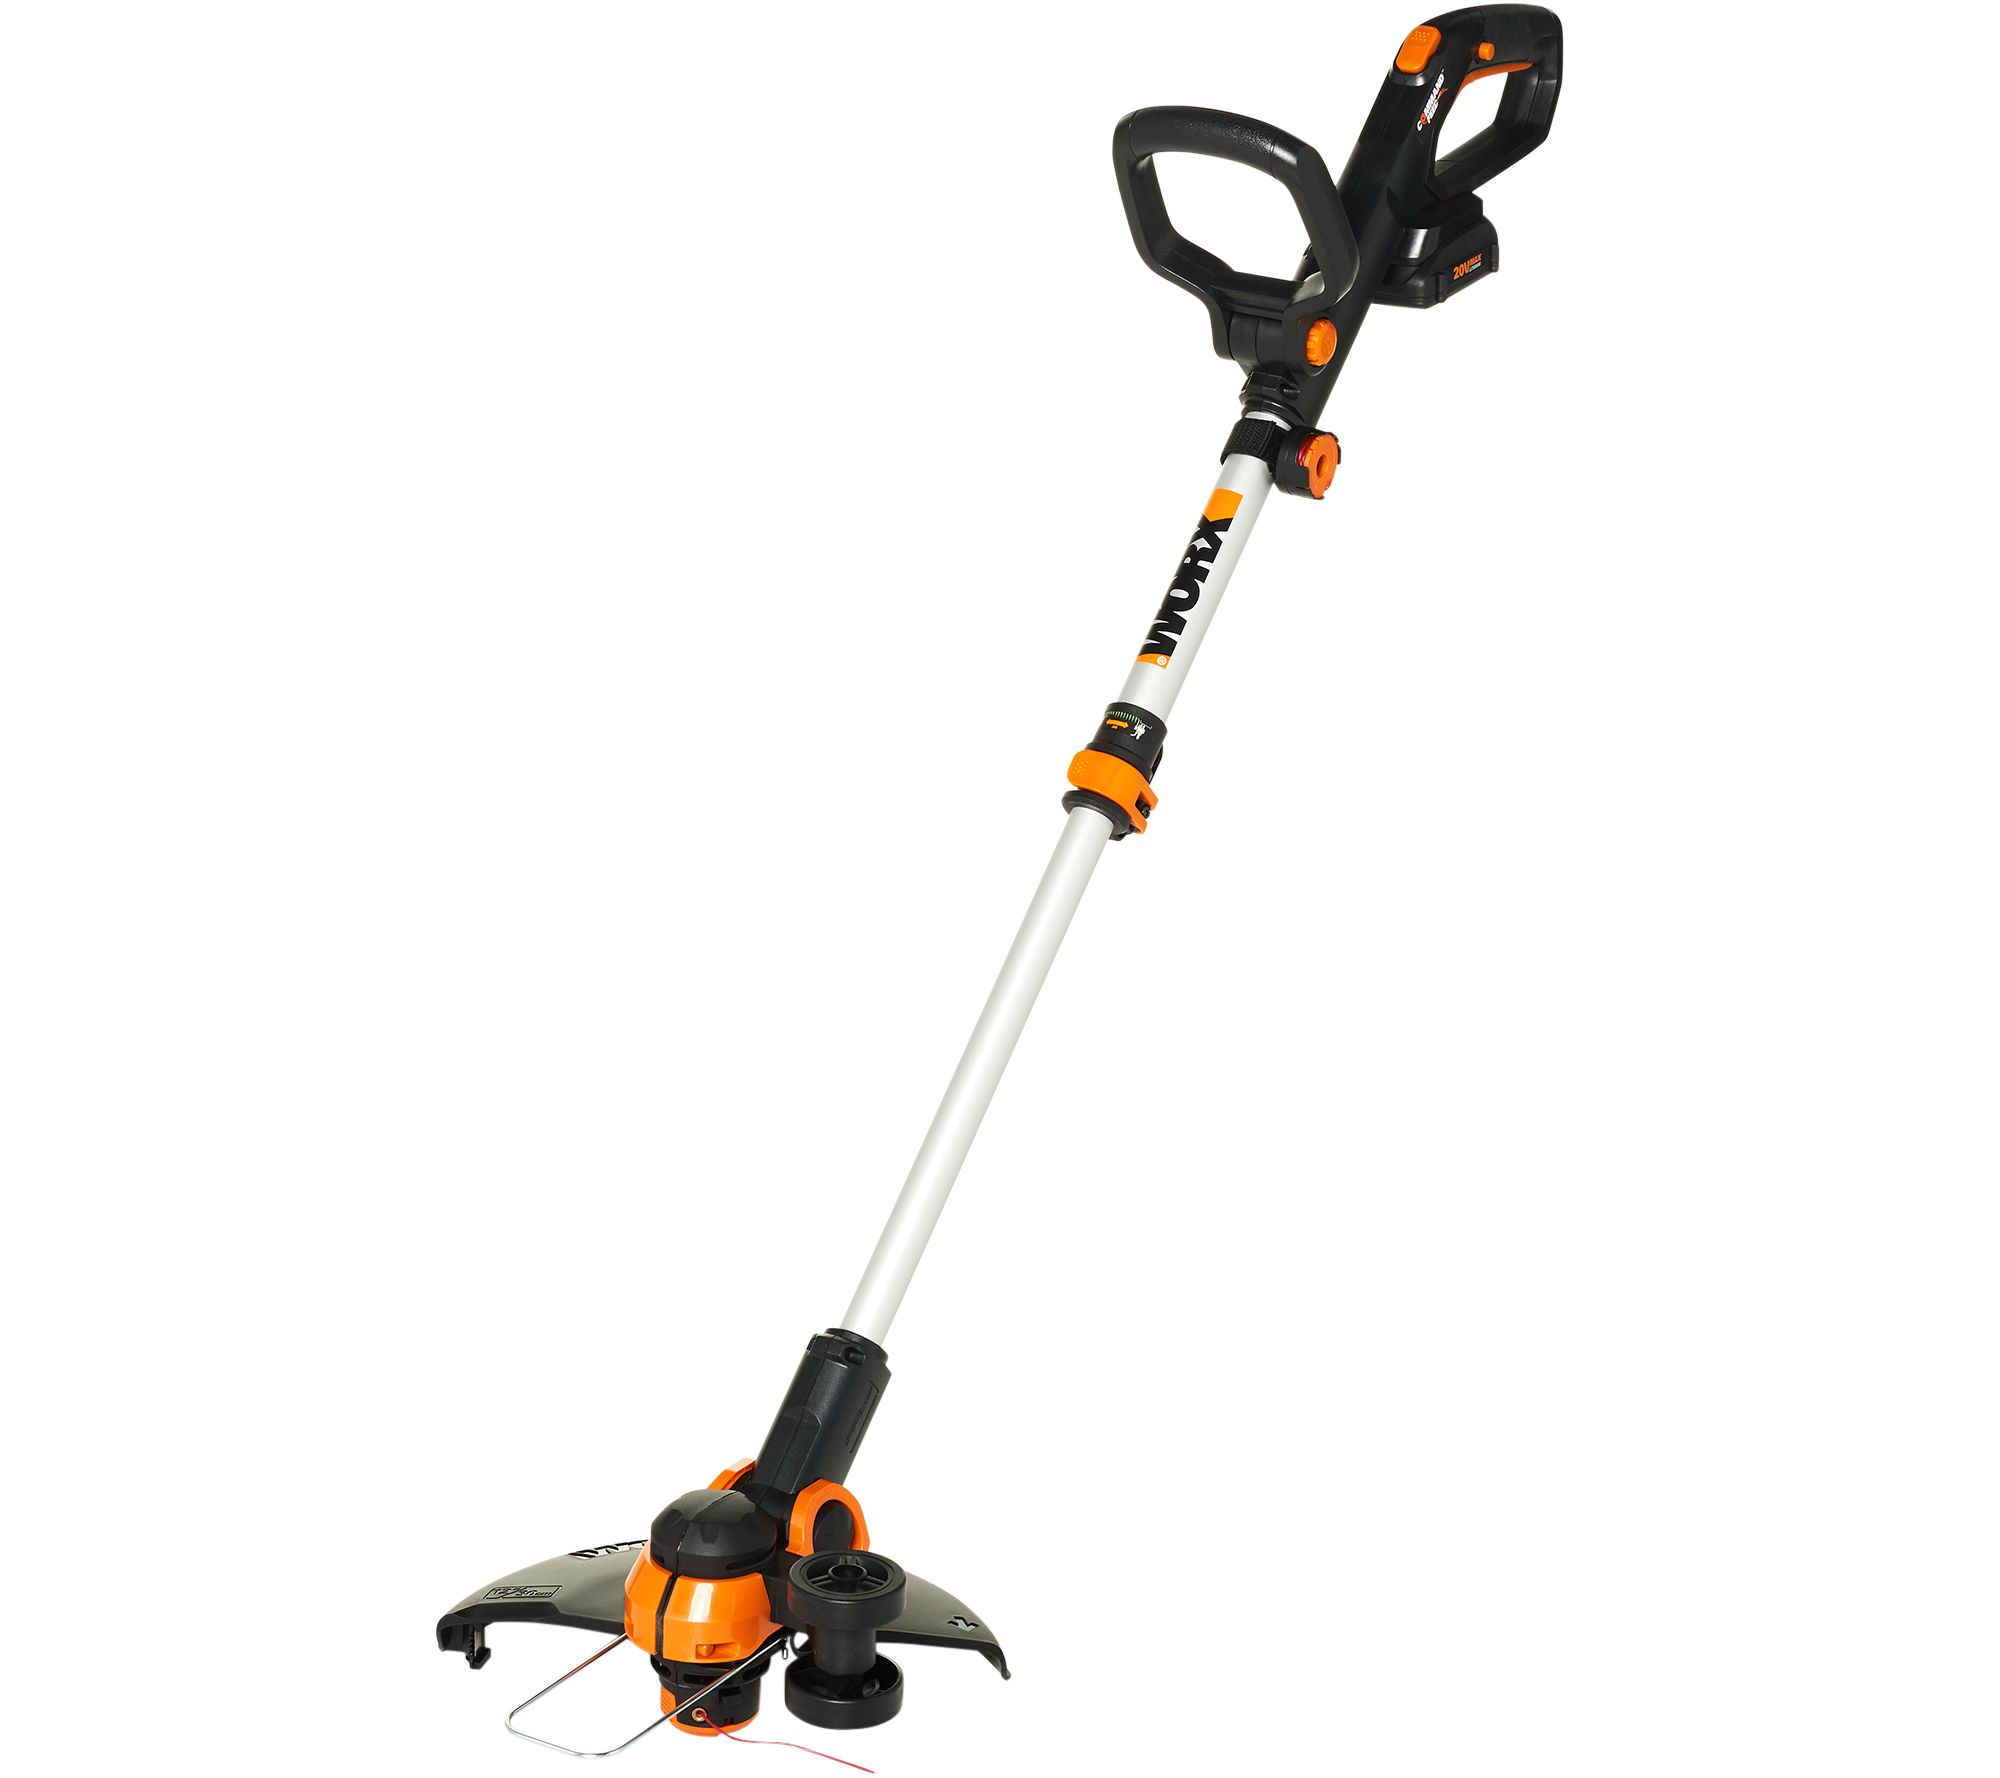 the worx weed eater